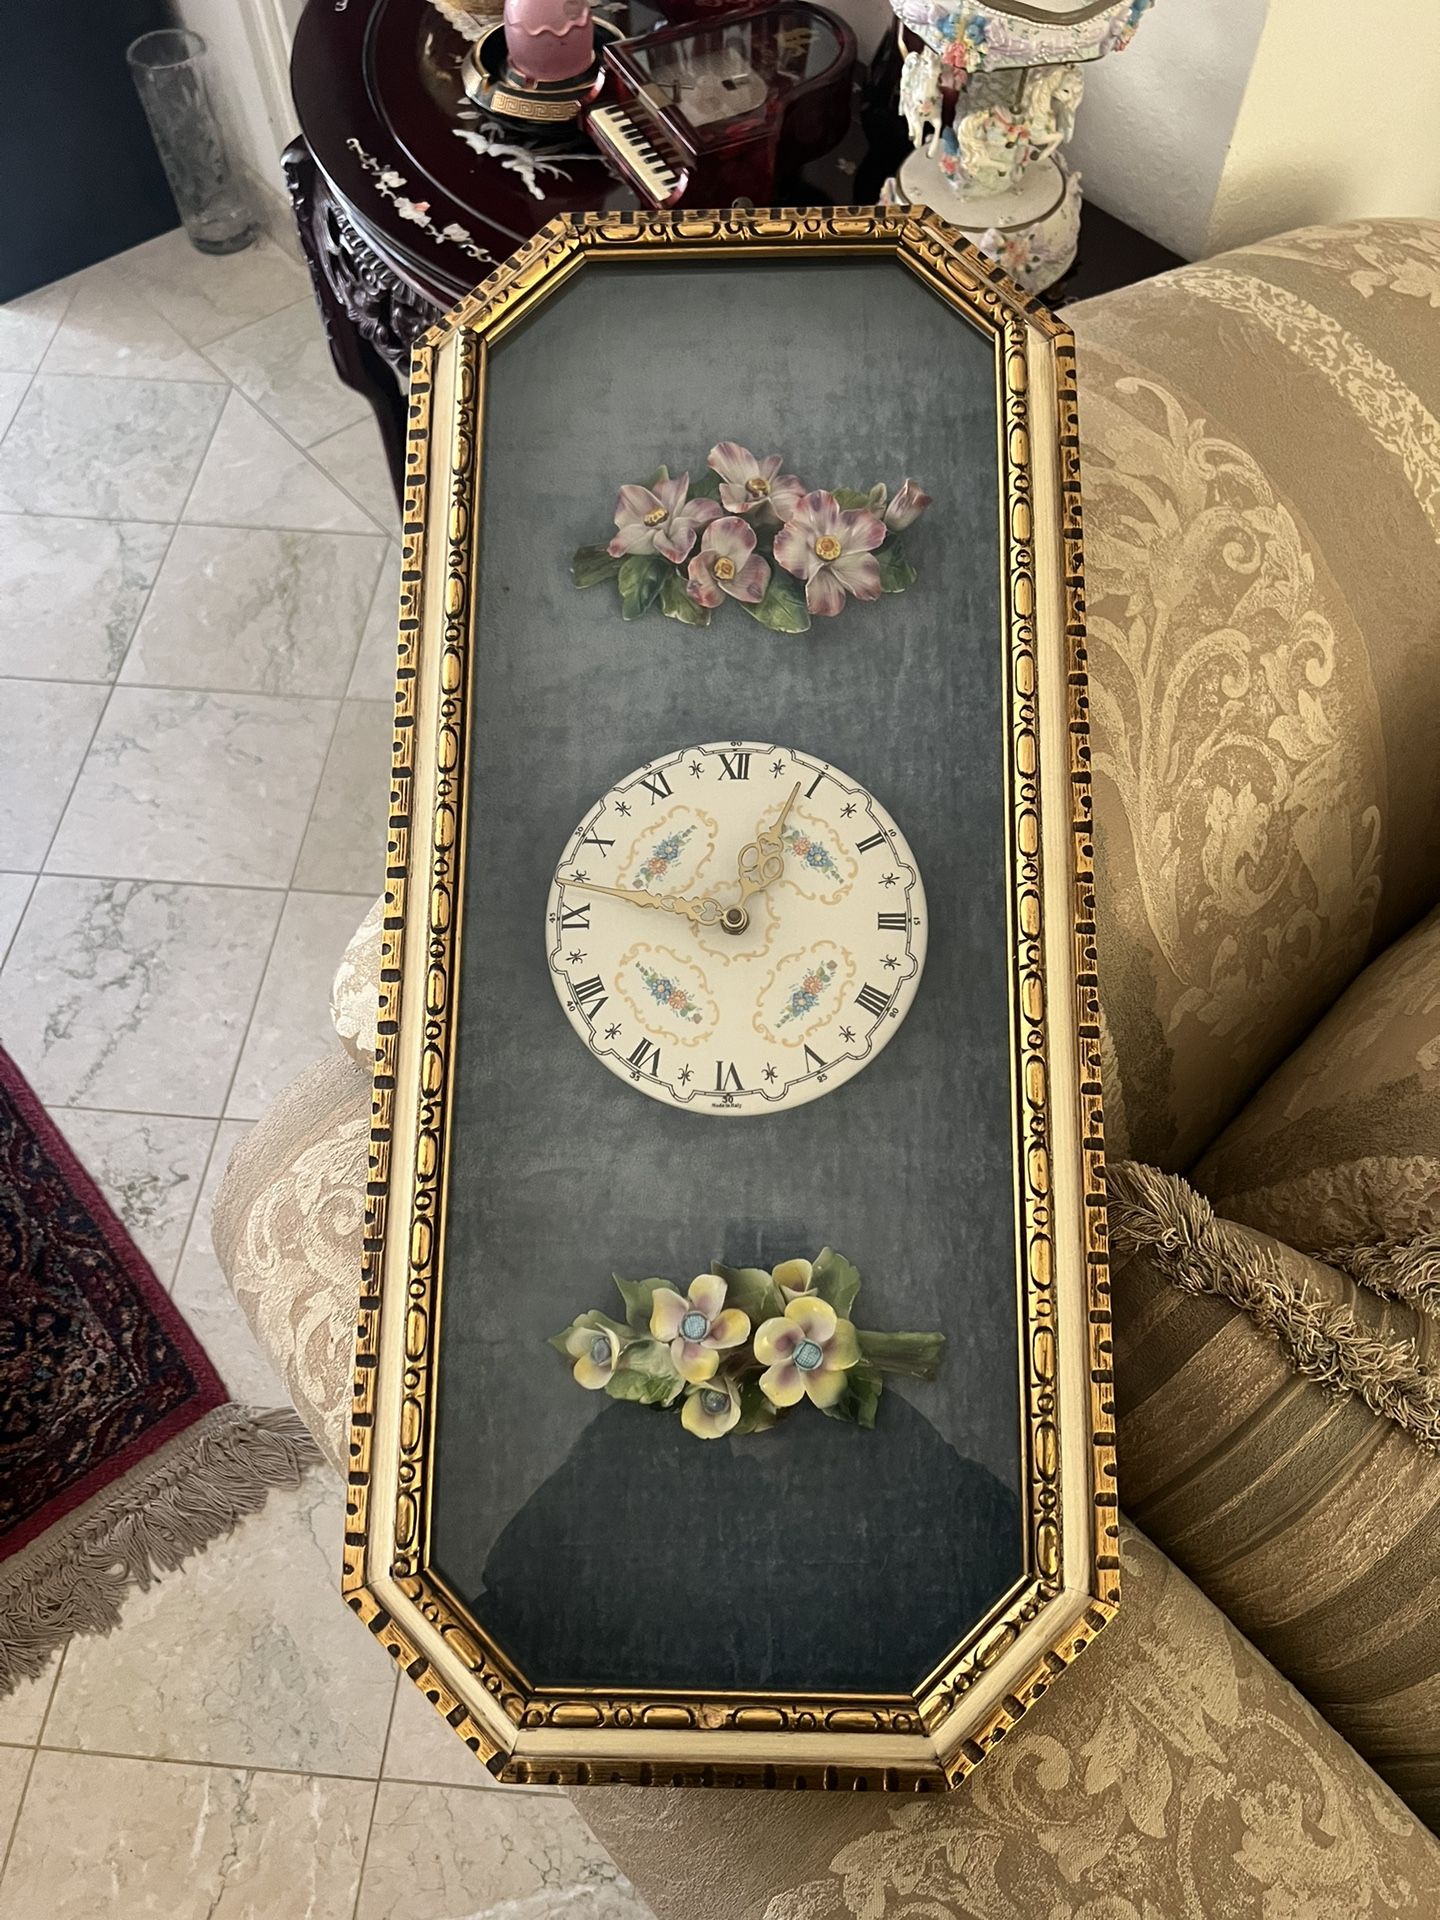 Vintage 1970's Italian French Provincial Floral style ceramic chiming clock